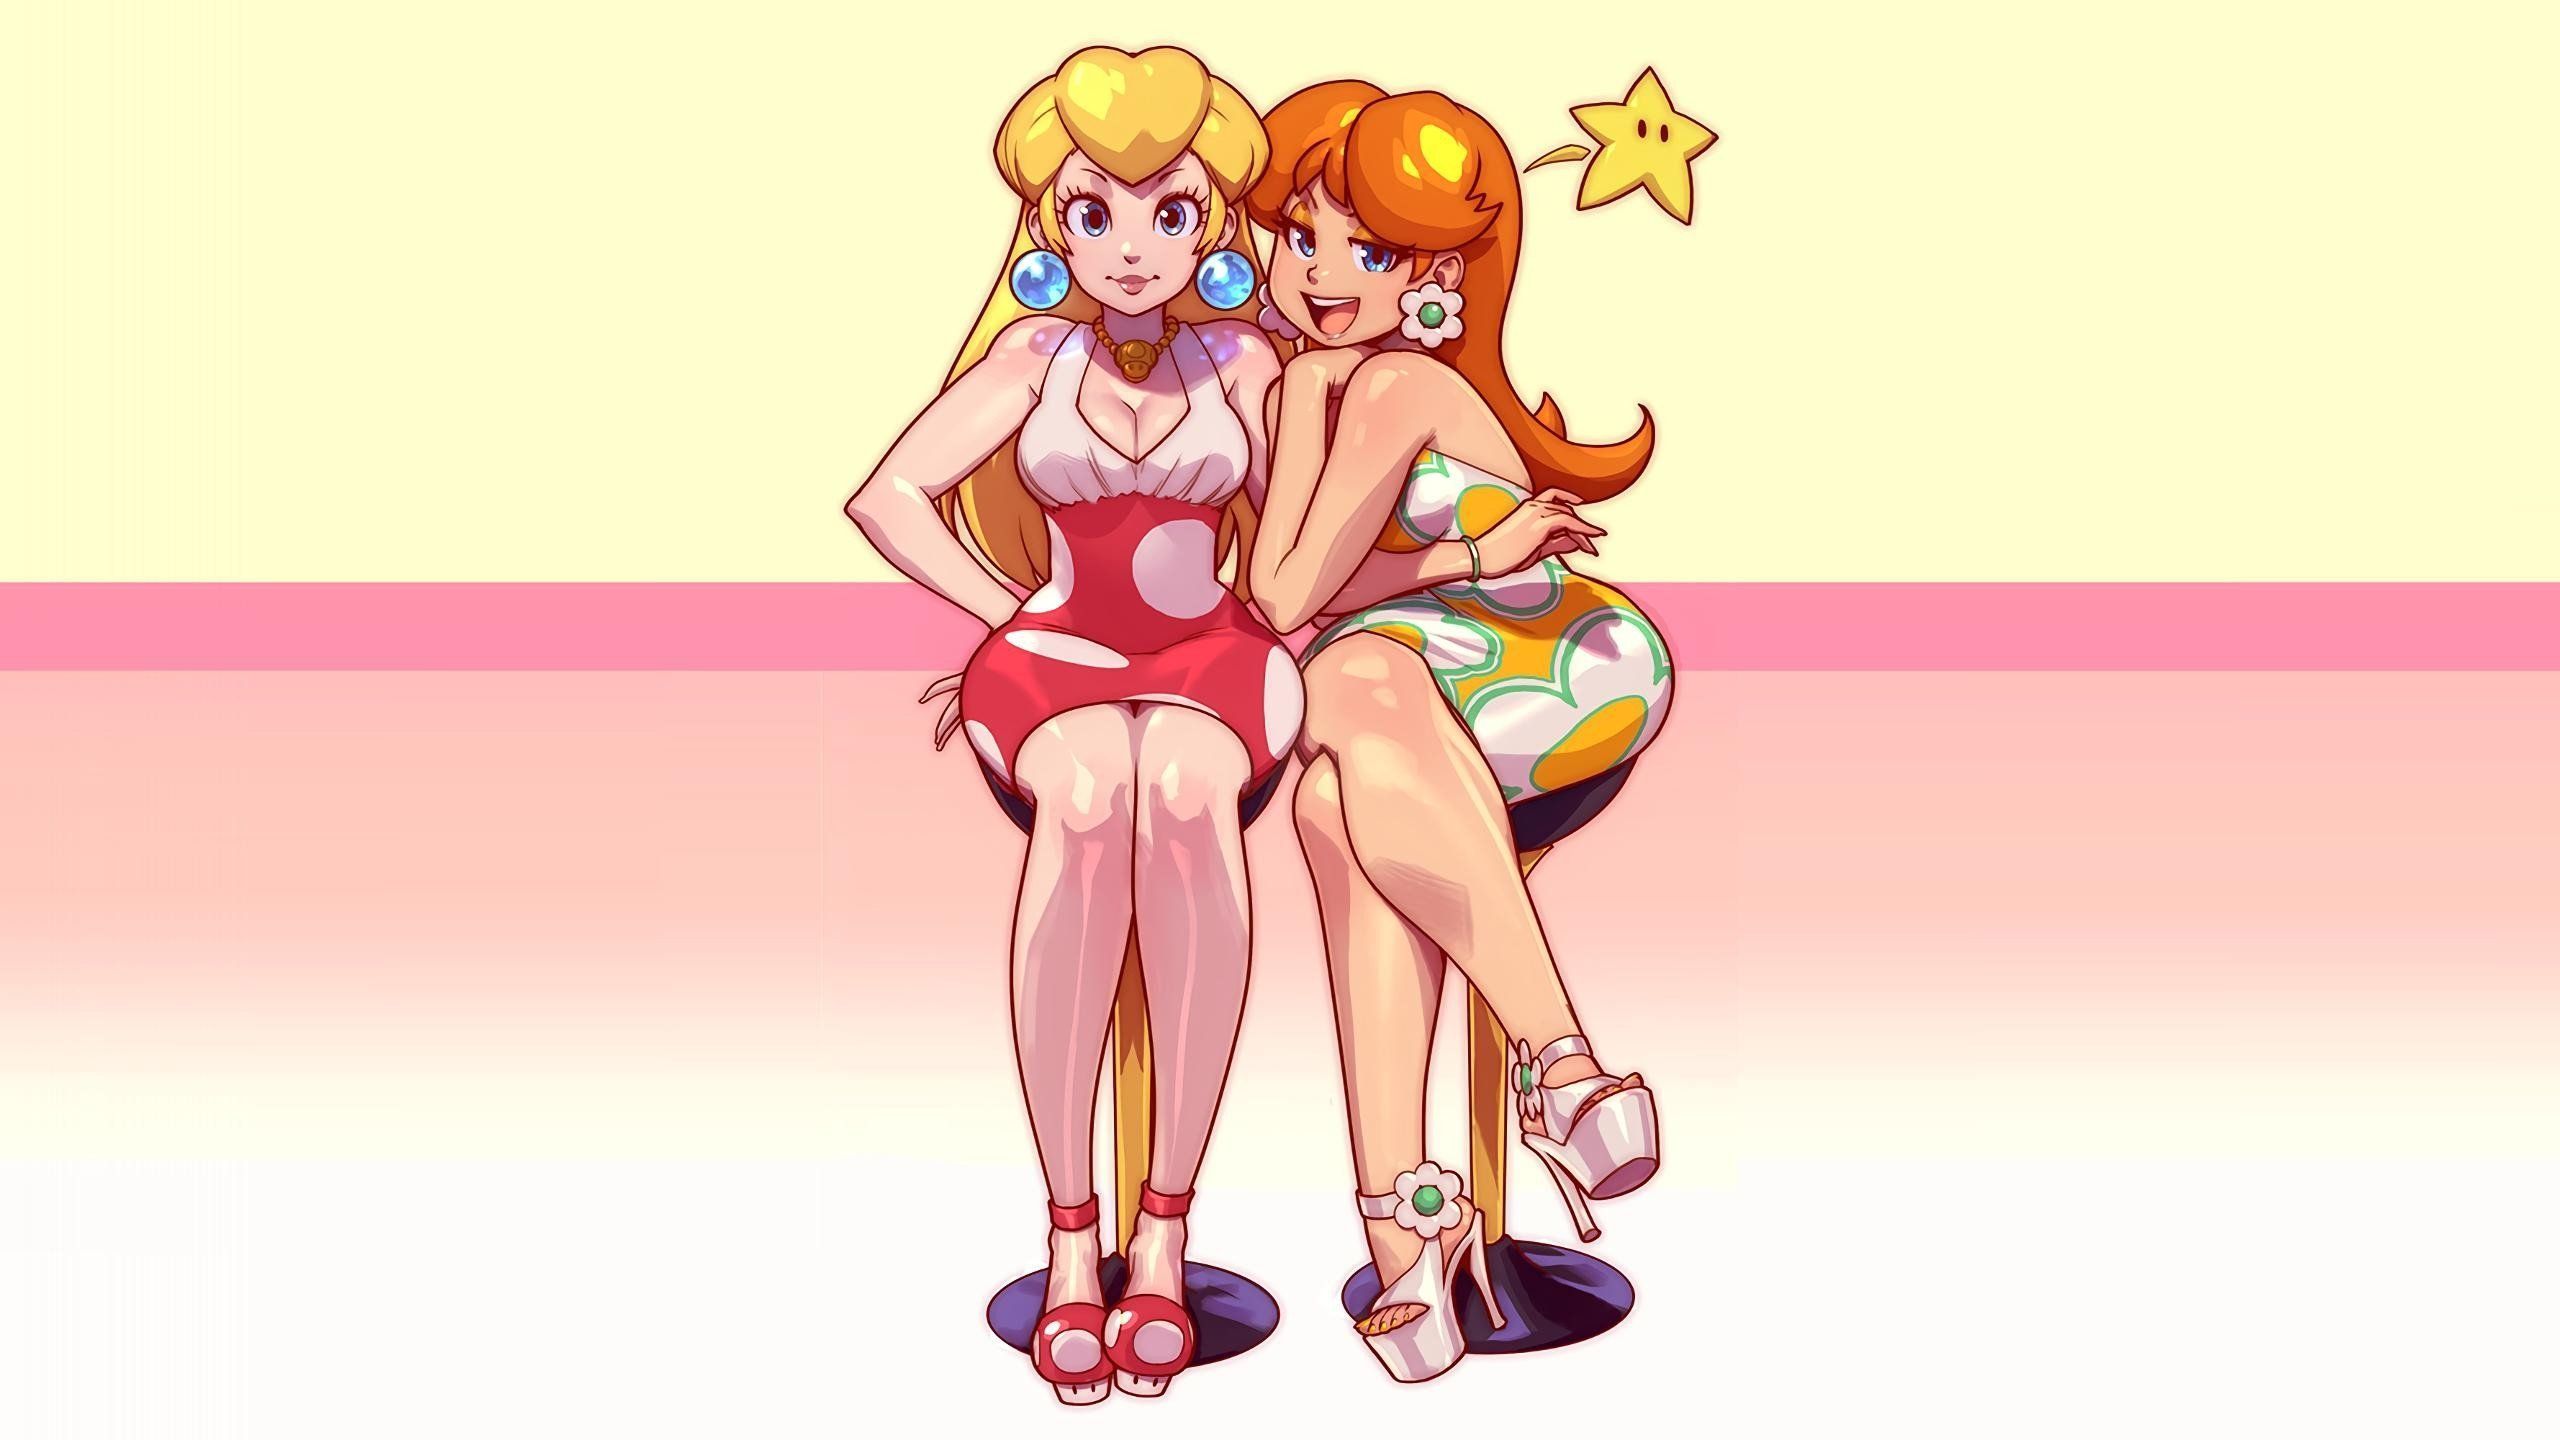 Two girls sitting on a bench with one of them holding the other - Princess Peach